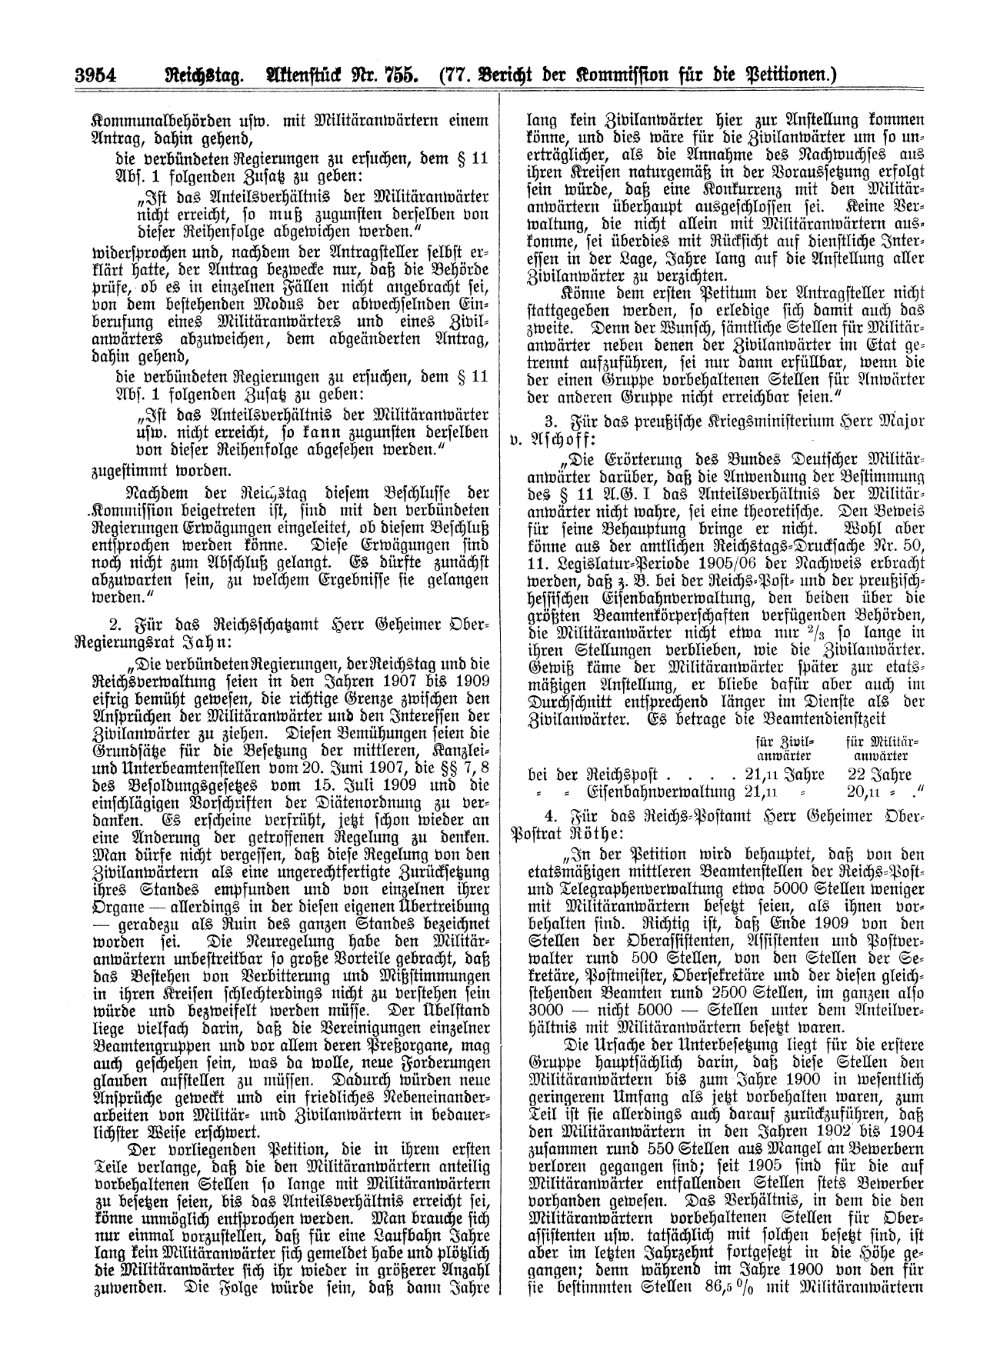 Scan of page 3954